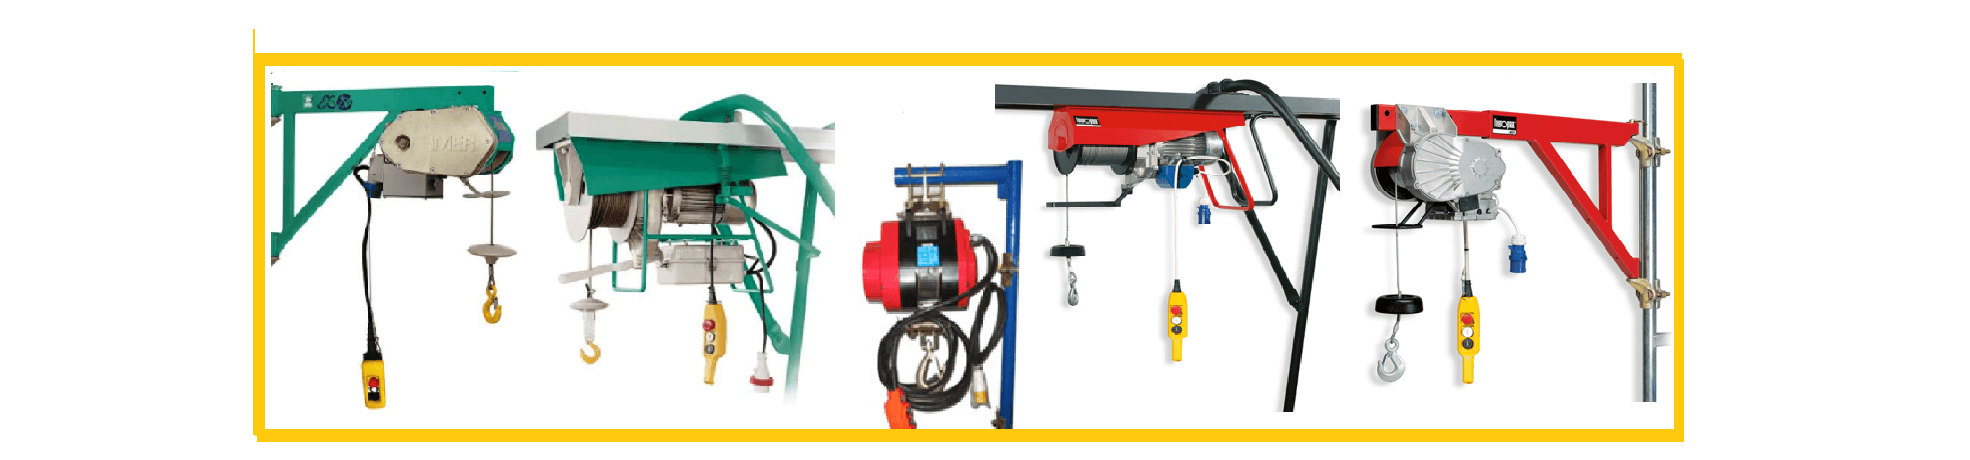 Scaffold Hoist collection from lifting Hoists Direct